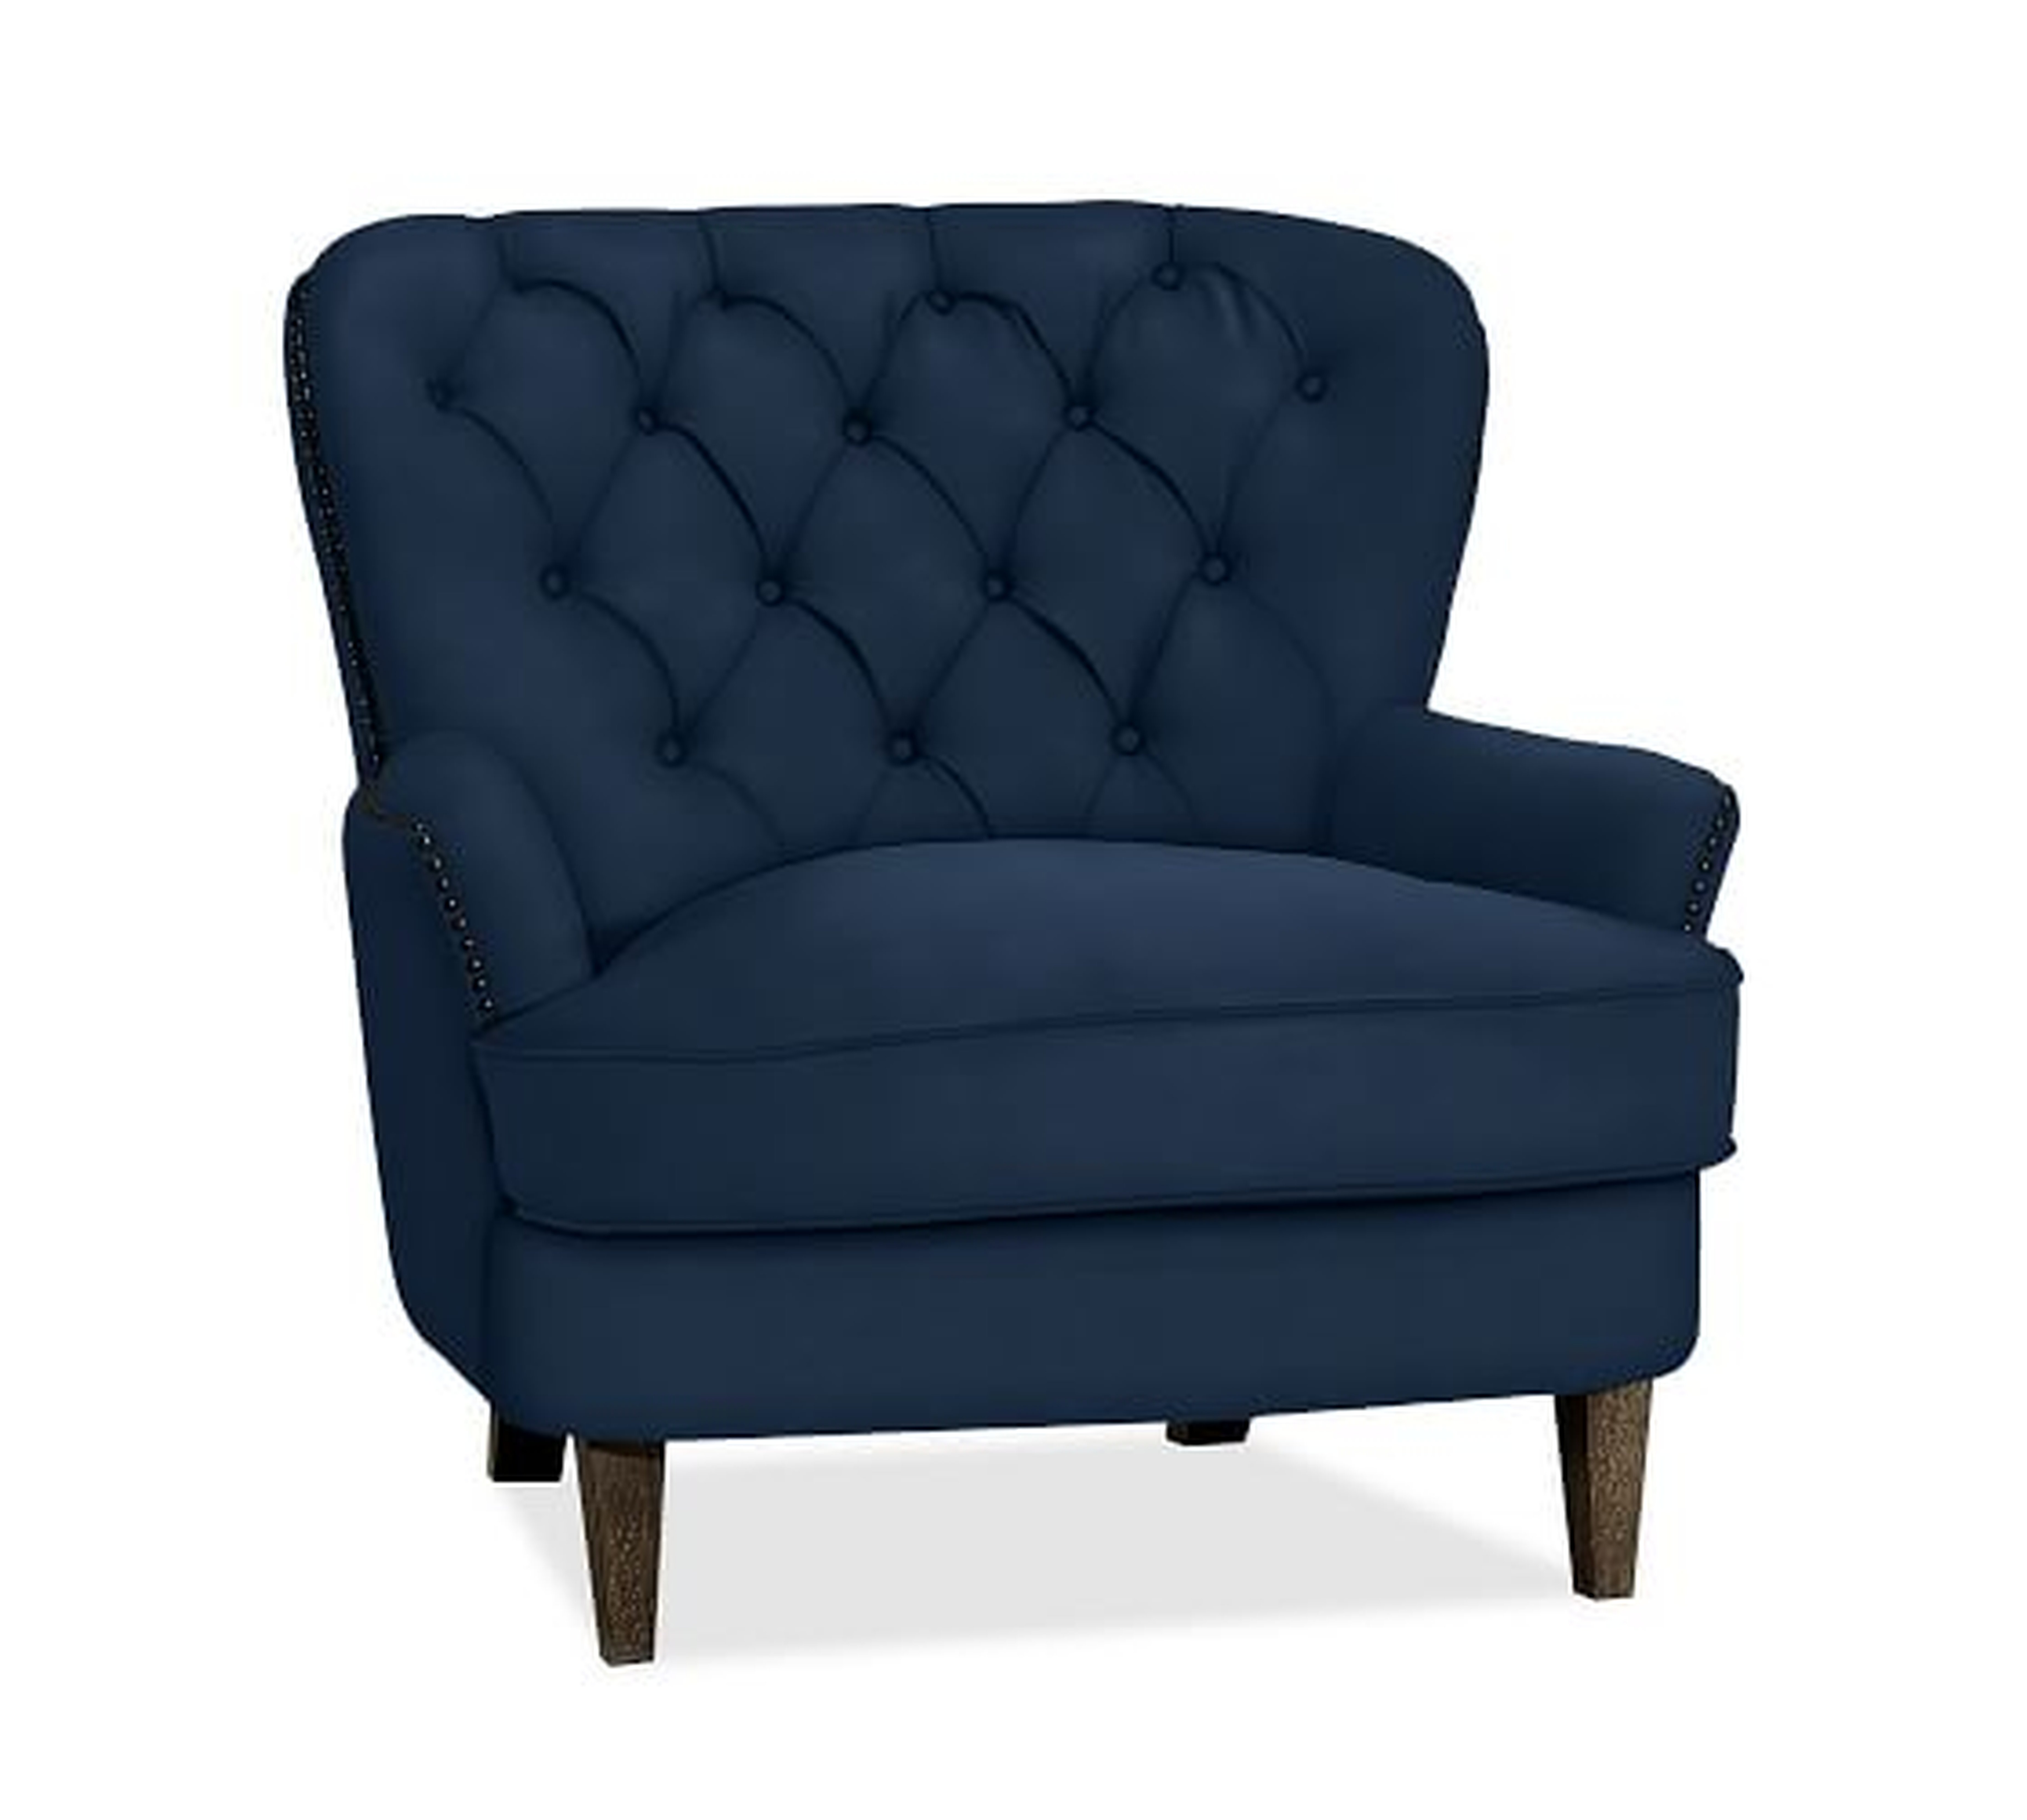 CARDIFF TUFTED UPHOLSTERED ARMCHAIR - Pottery Barn